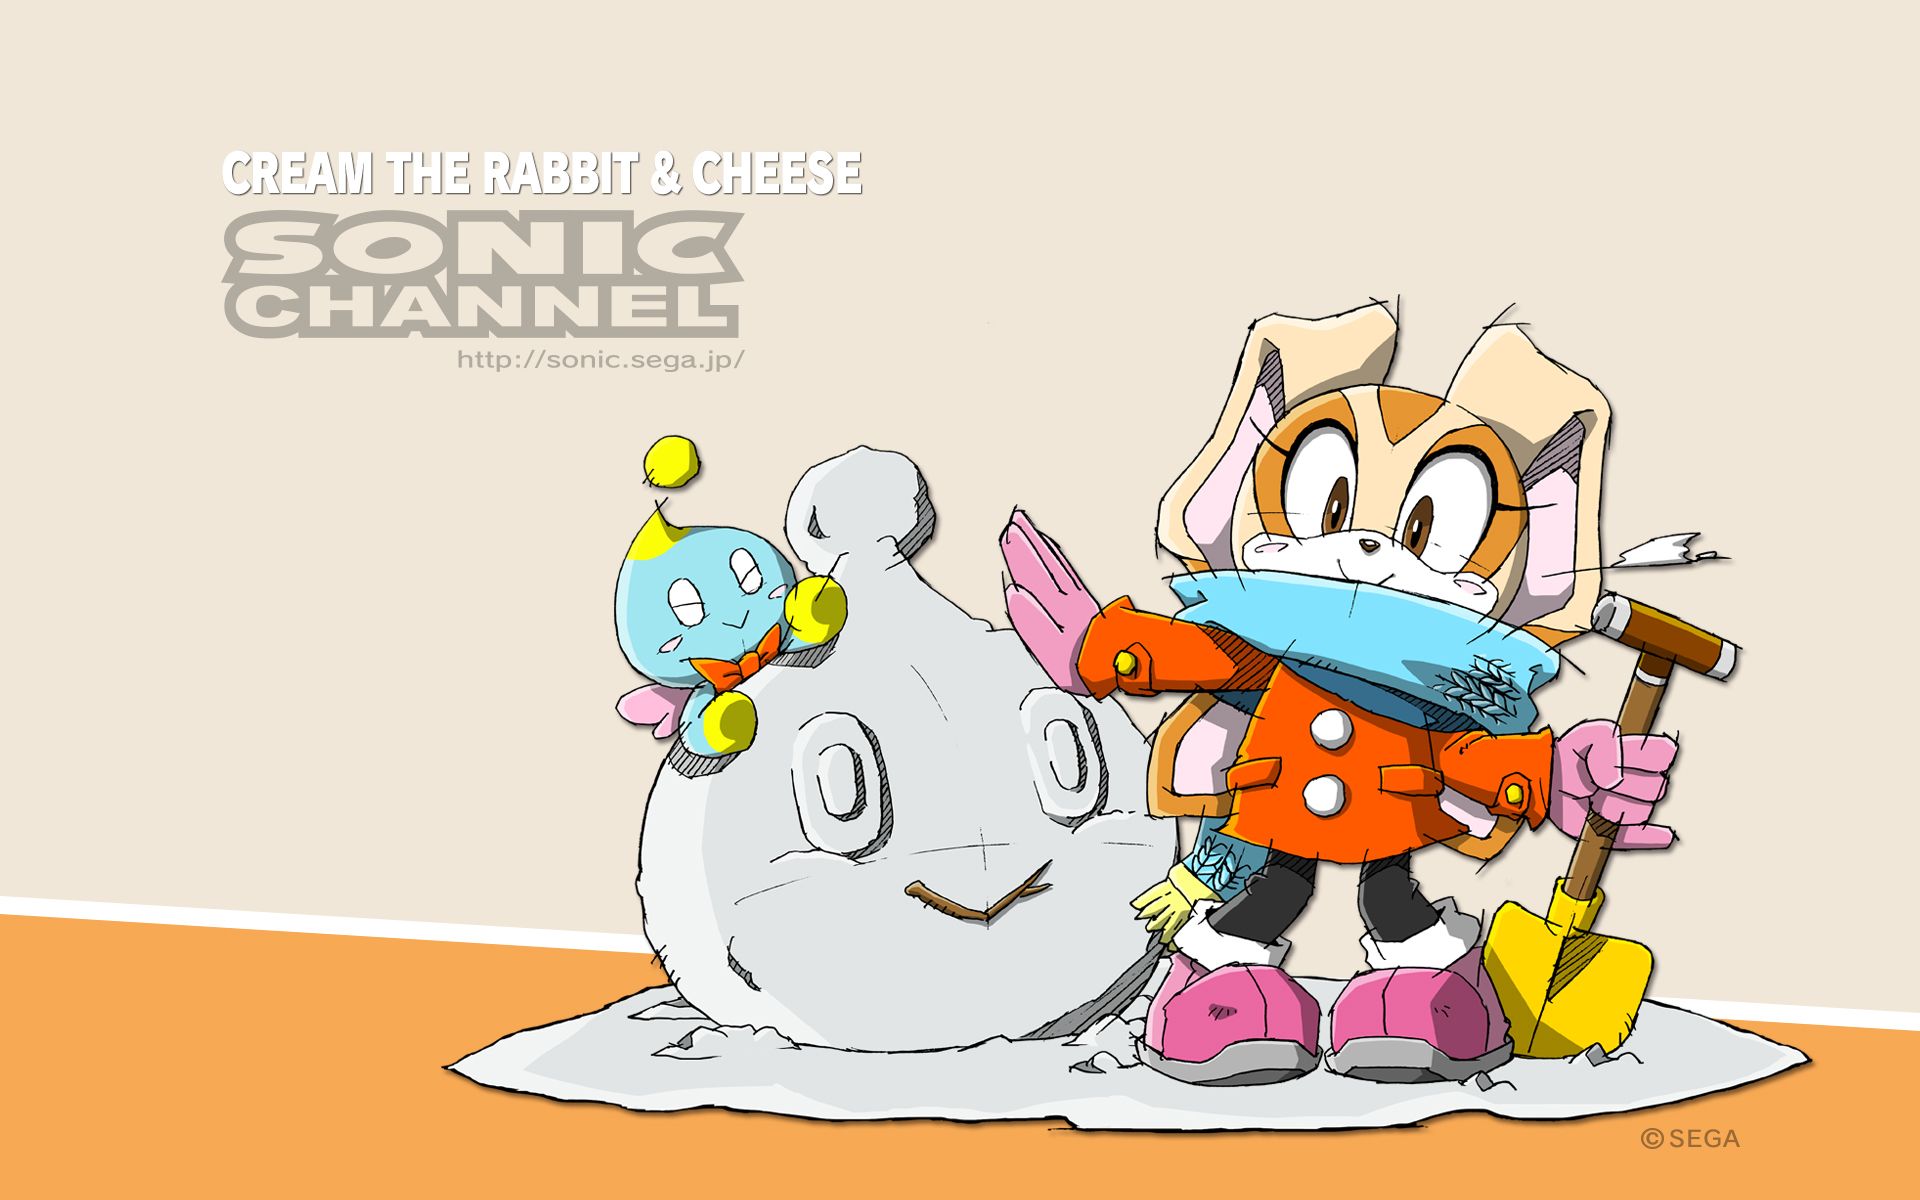 Wallpapers - Sonic Channel - Last Minute Continue